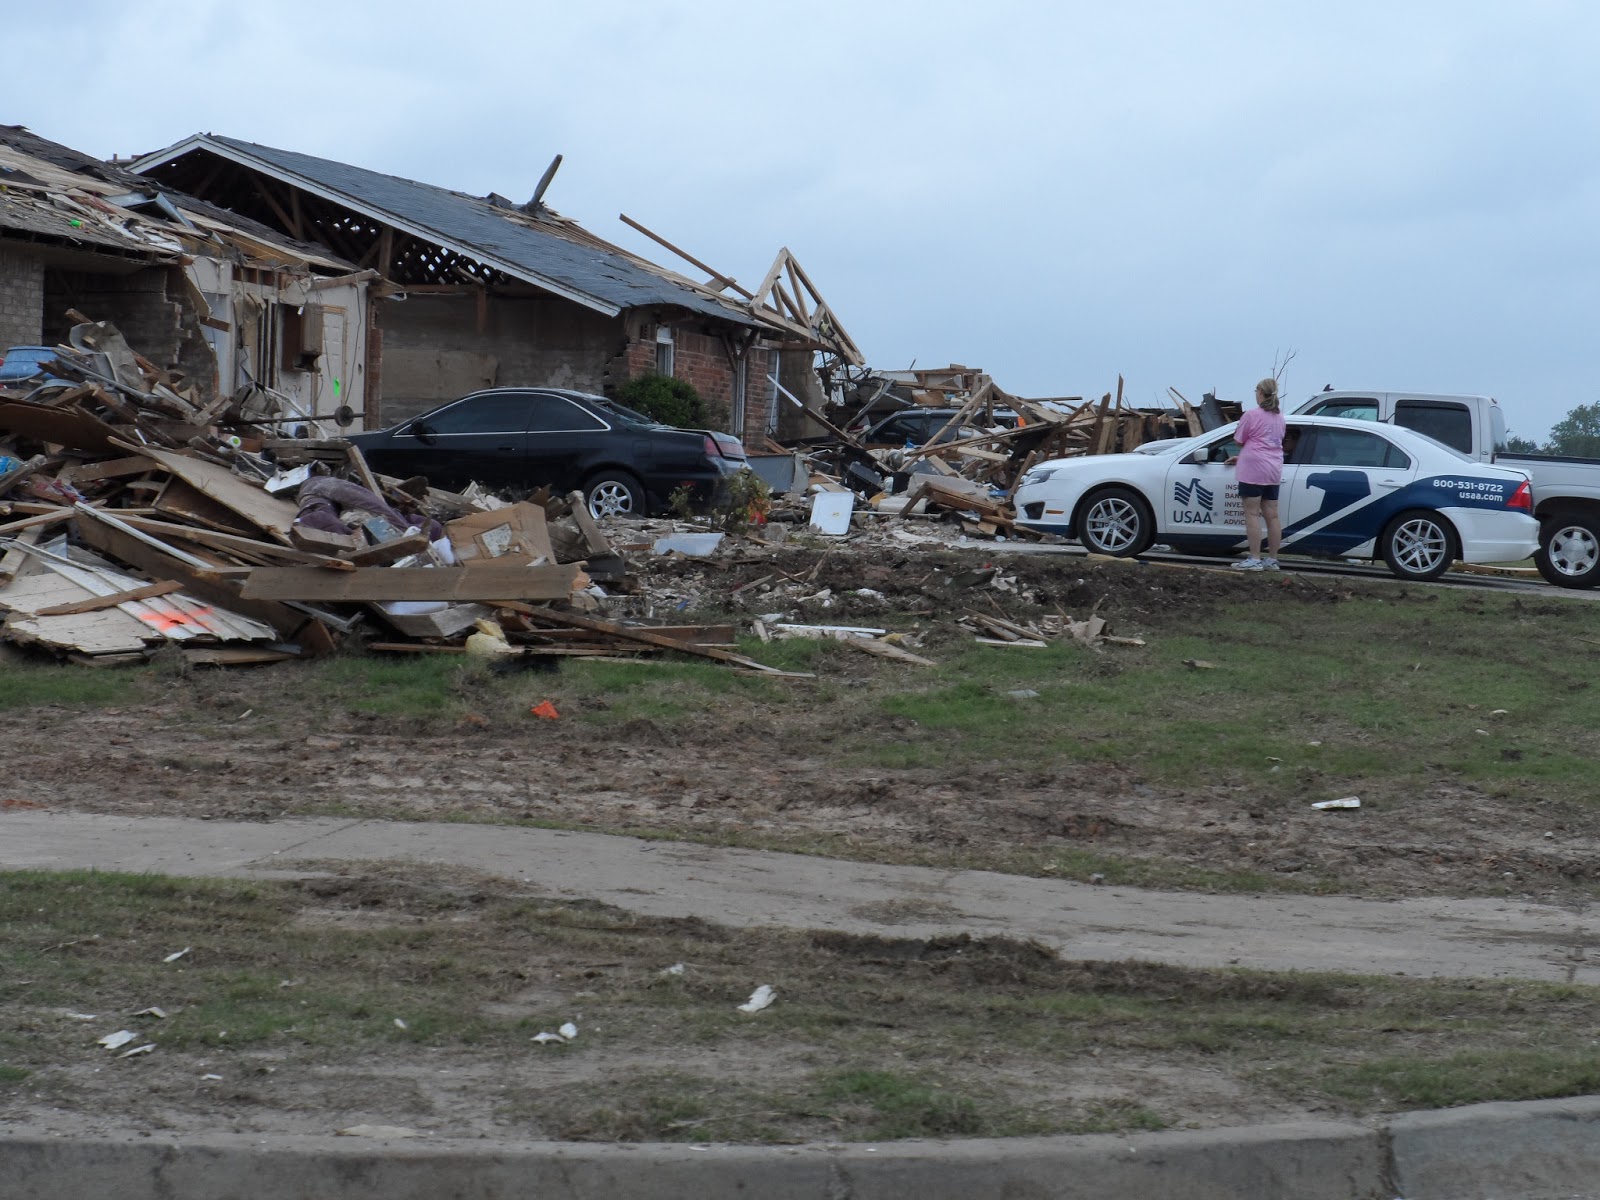 Armor Glass® Blog: Photos of Damages from an EF5 Tornado...Moore OK